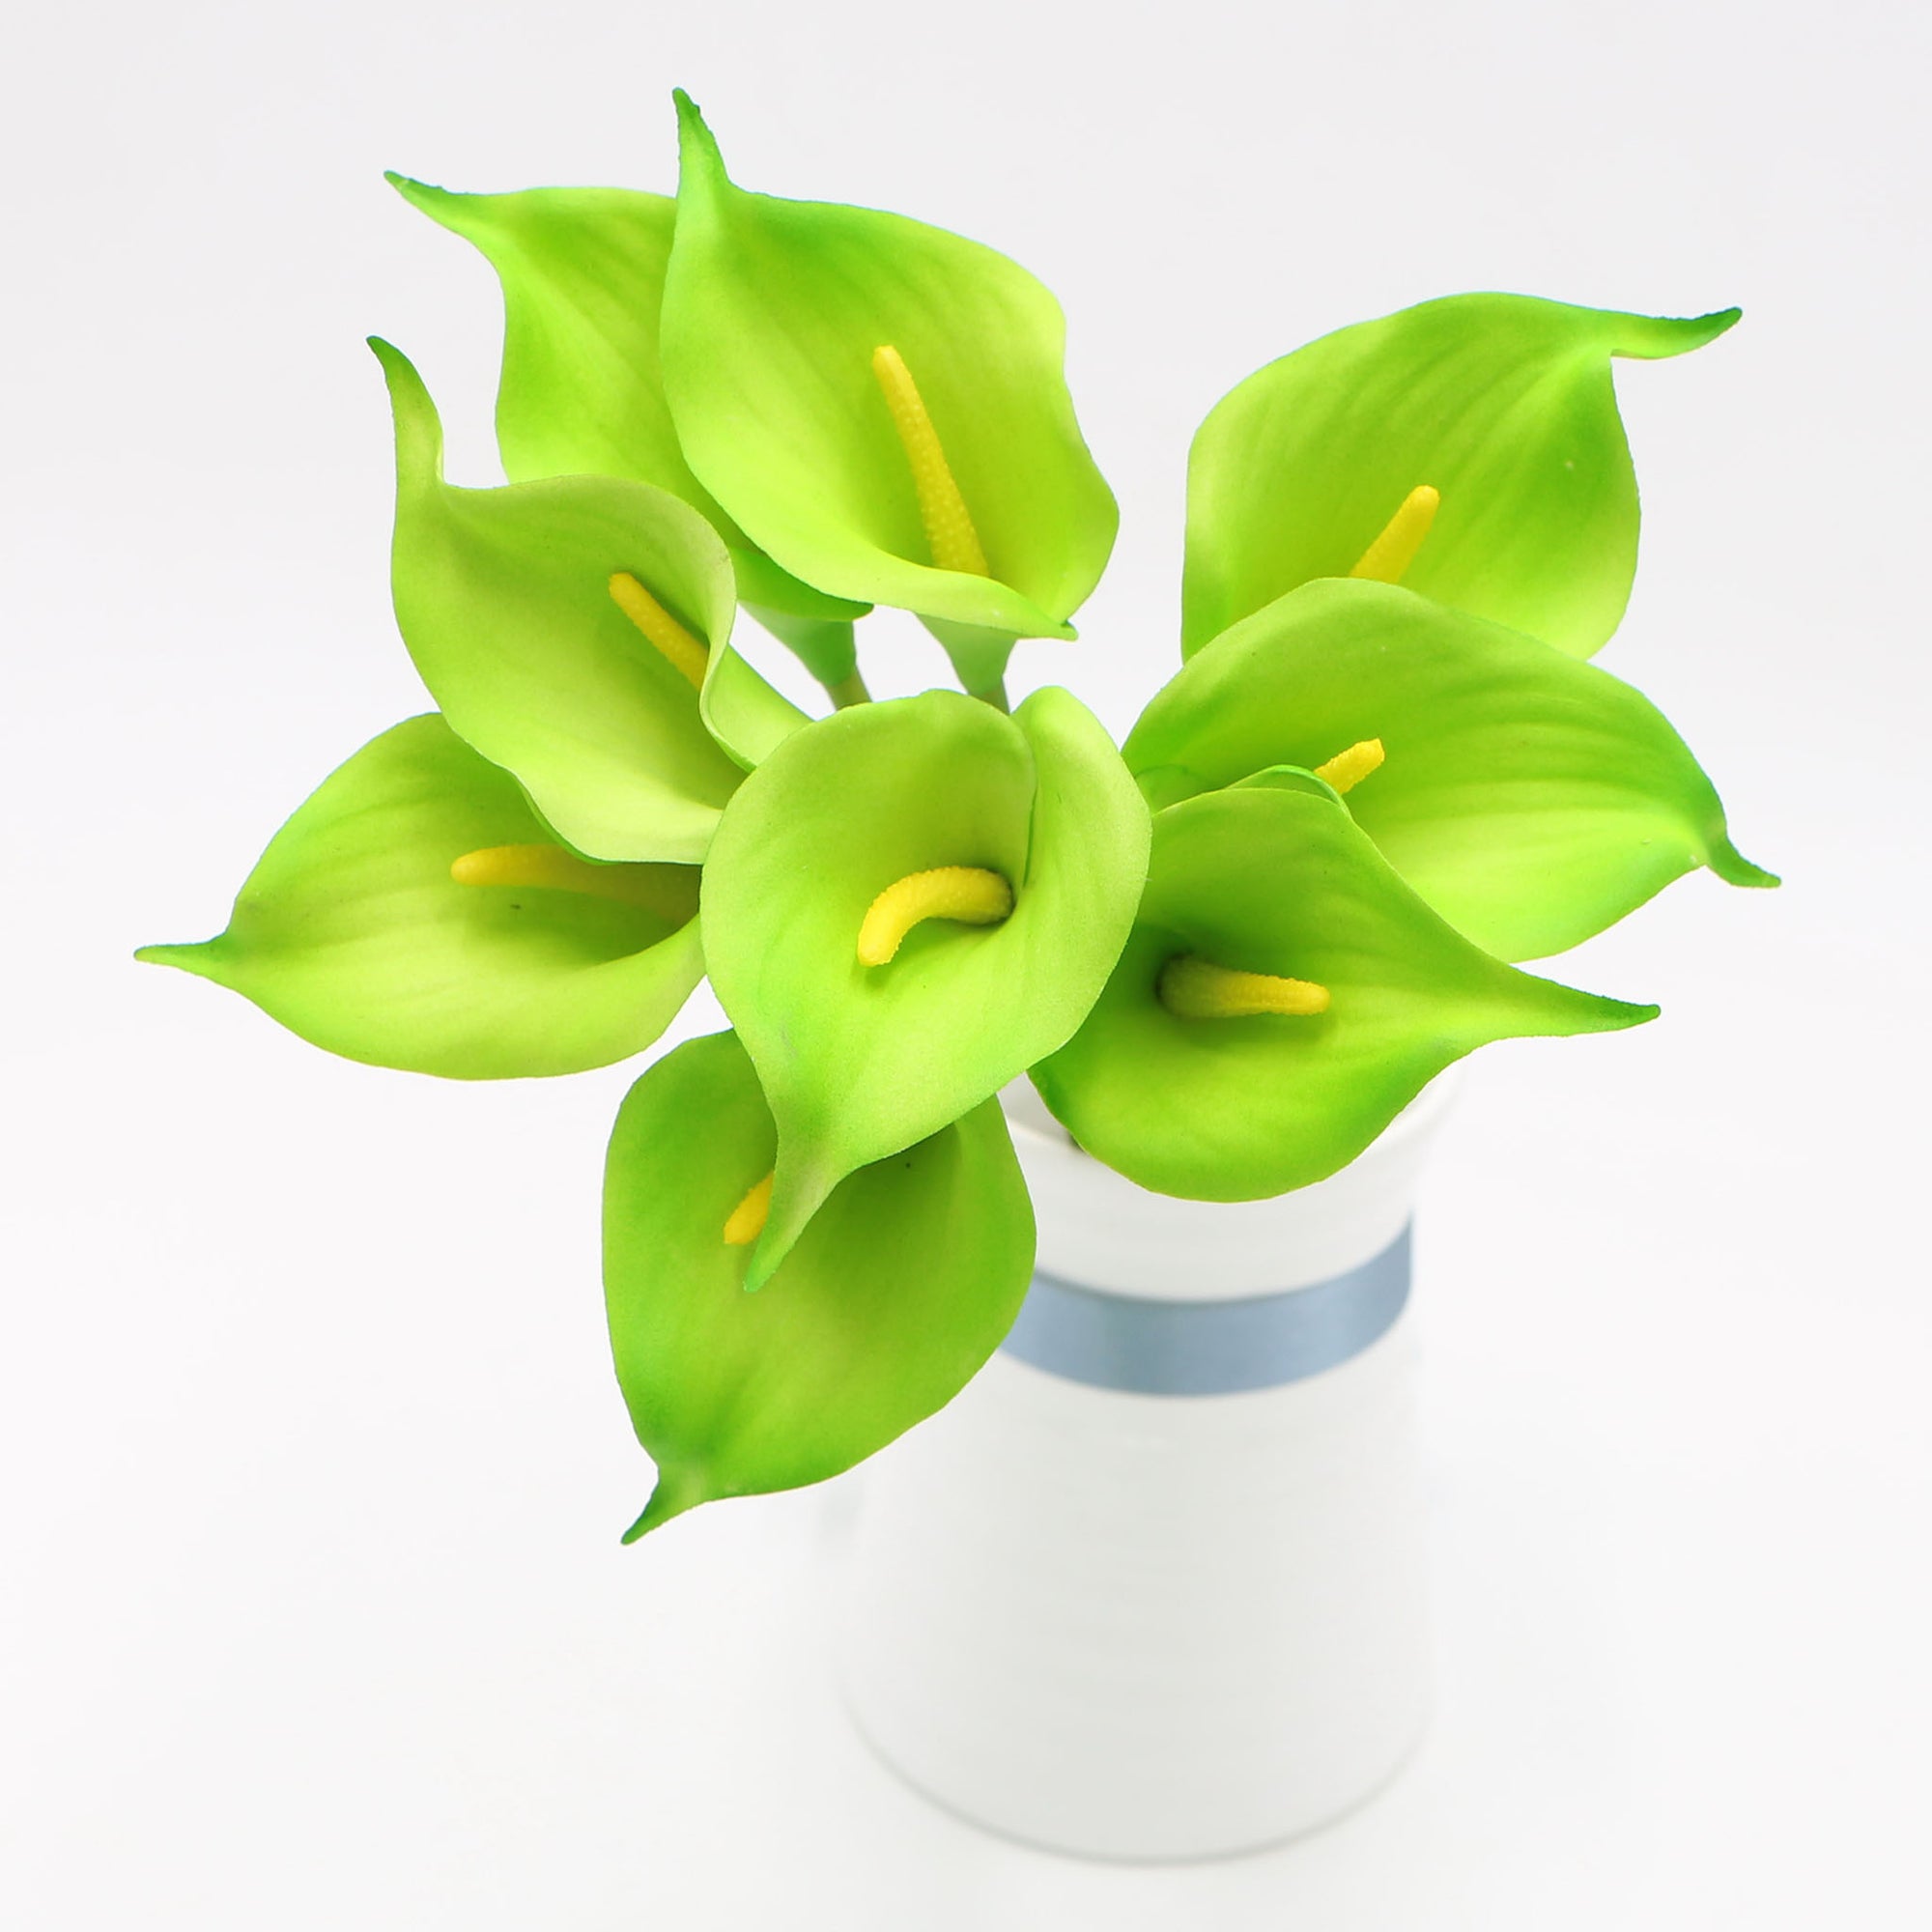 Lime Green Calla Lily Bouquet Real Touch Flowers for Corsages DIY